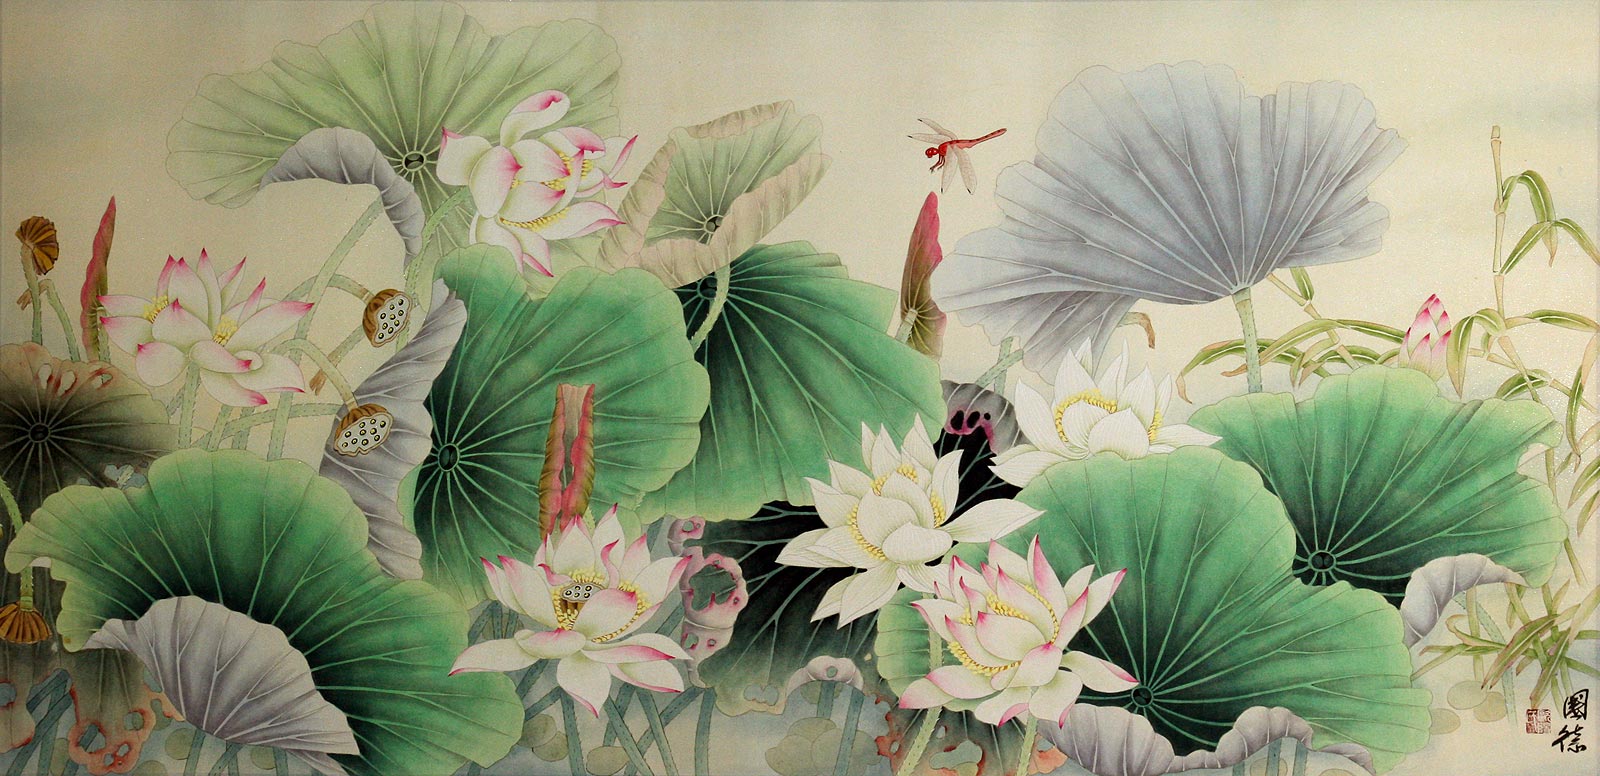 Lotus, Bamboo and Dragonfly - Beautiful Flowers Painting